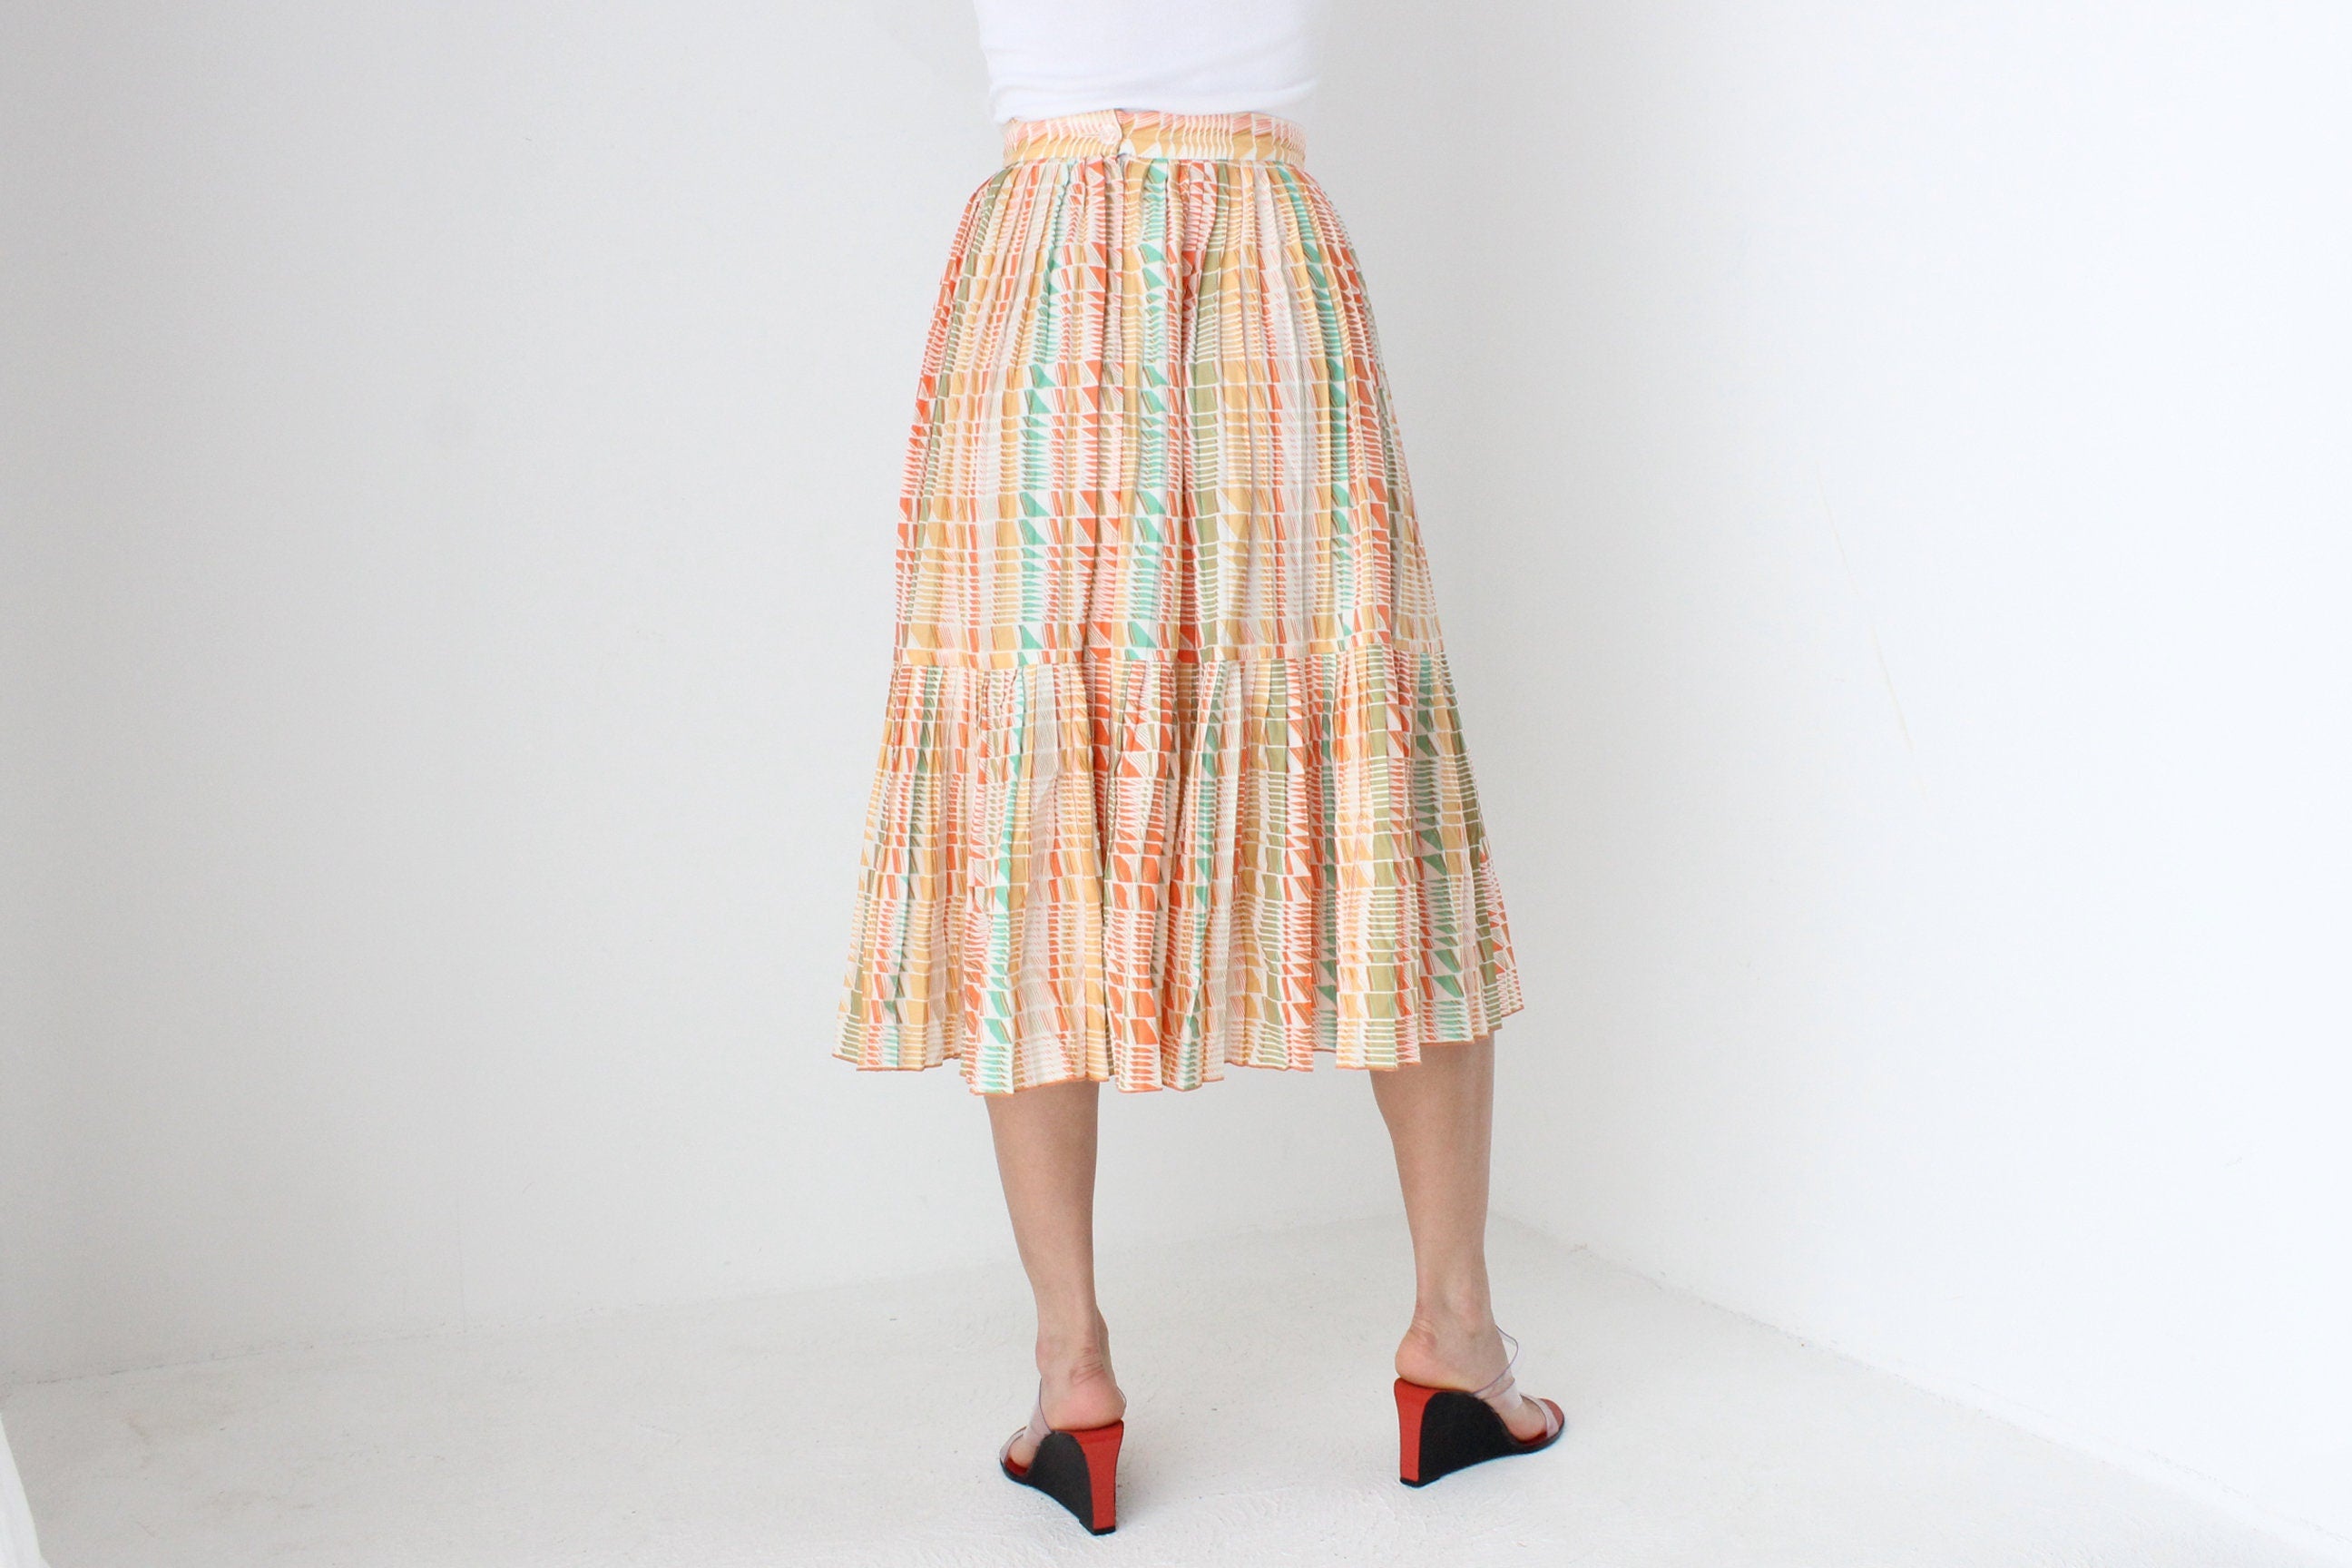 80s Pastel Checked Print Pleated High Waist Skirt